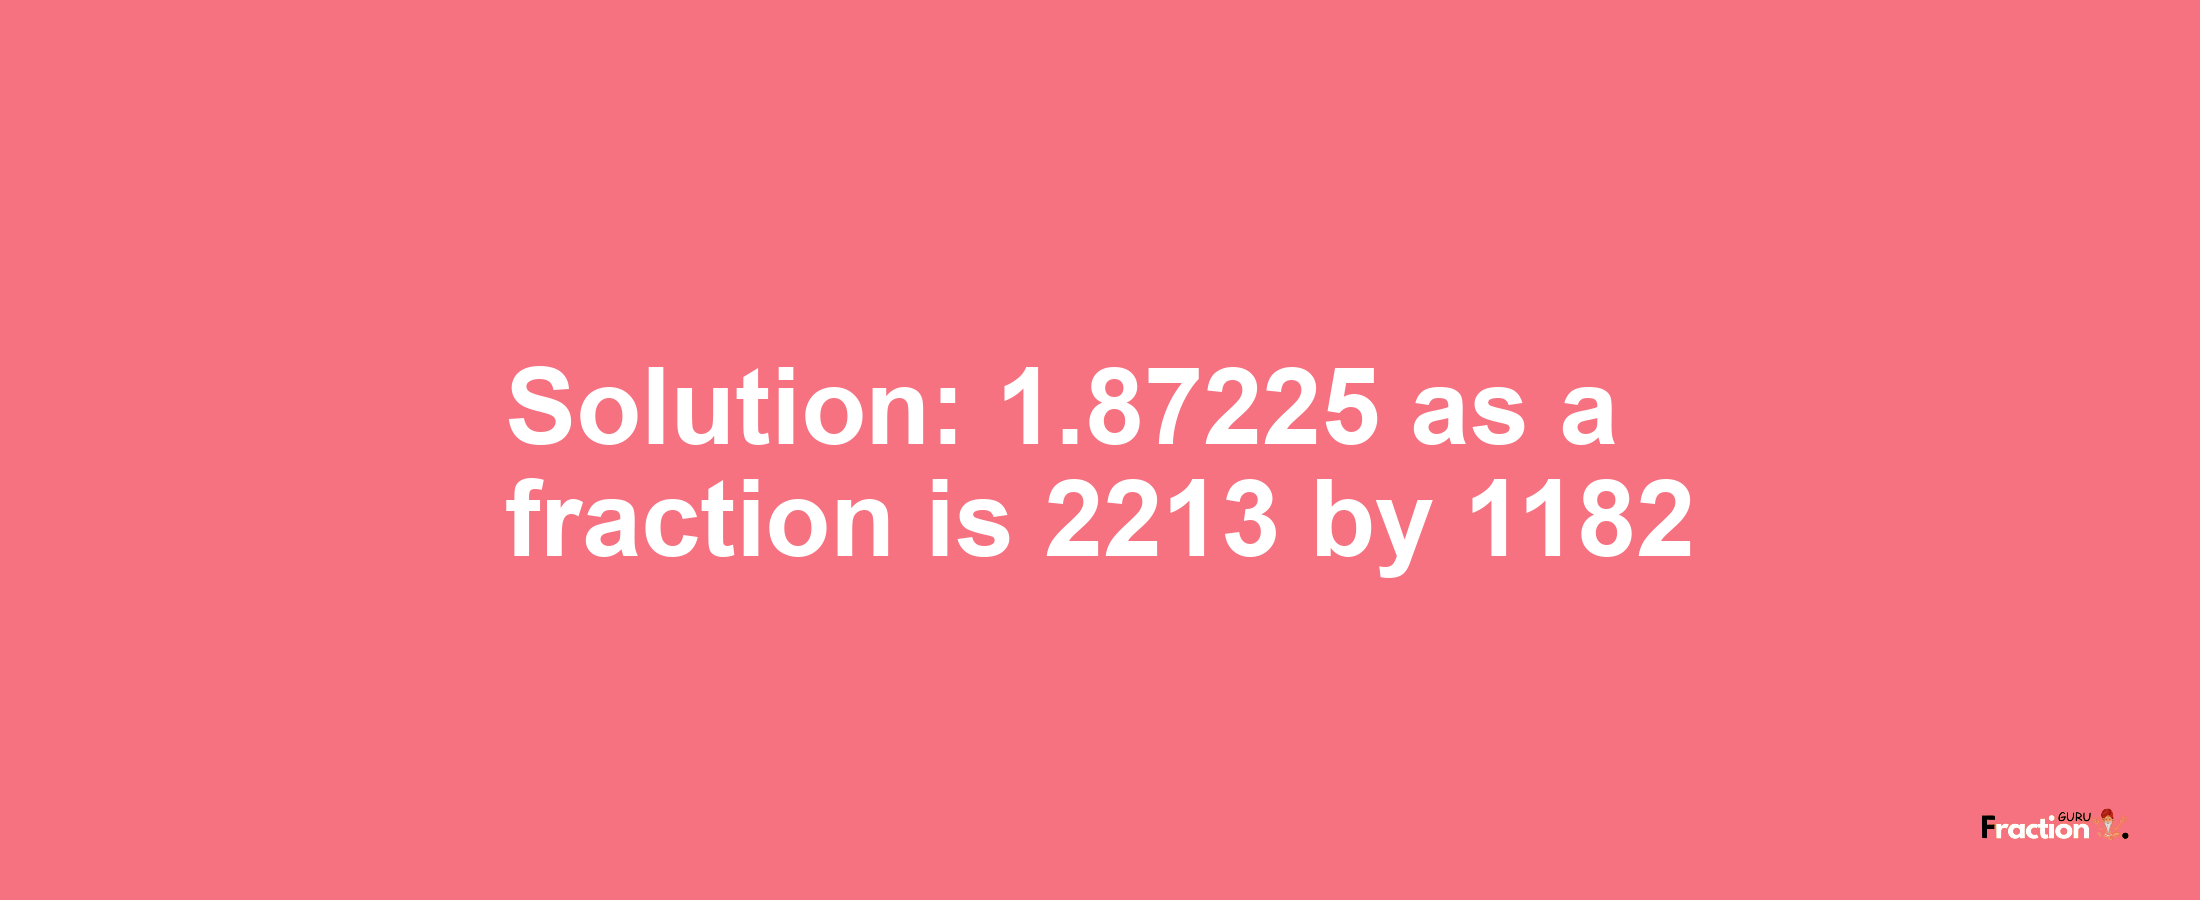 Solution:1.87225 as a fraction is 2213/1182